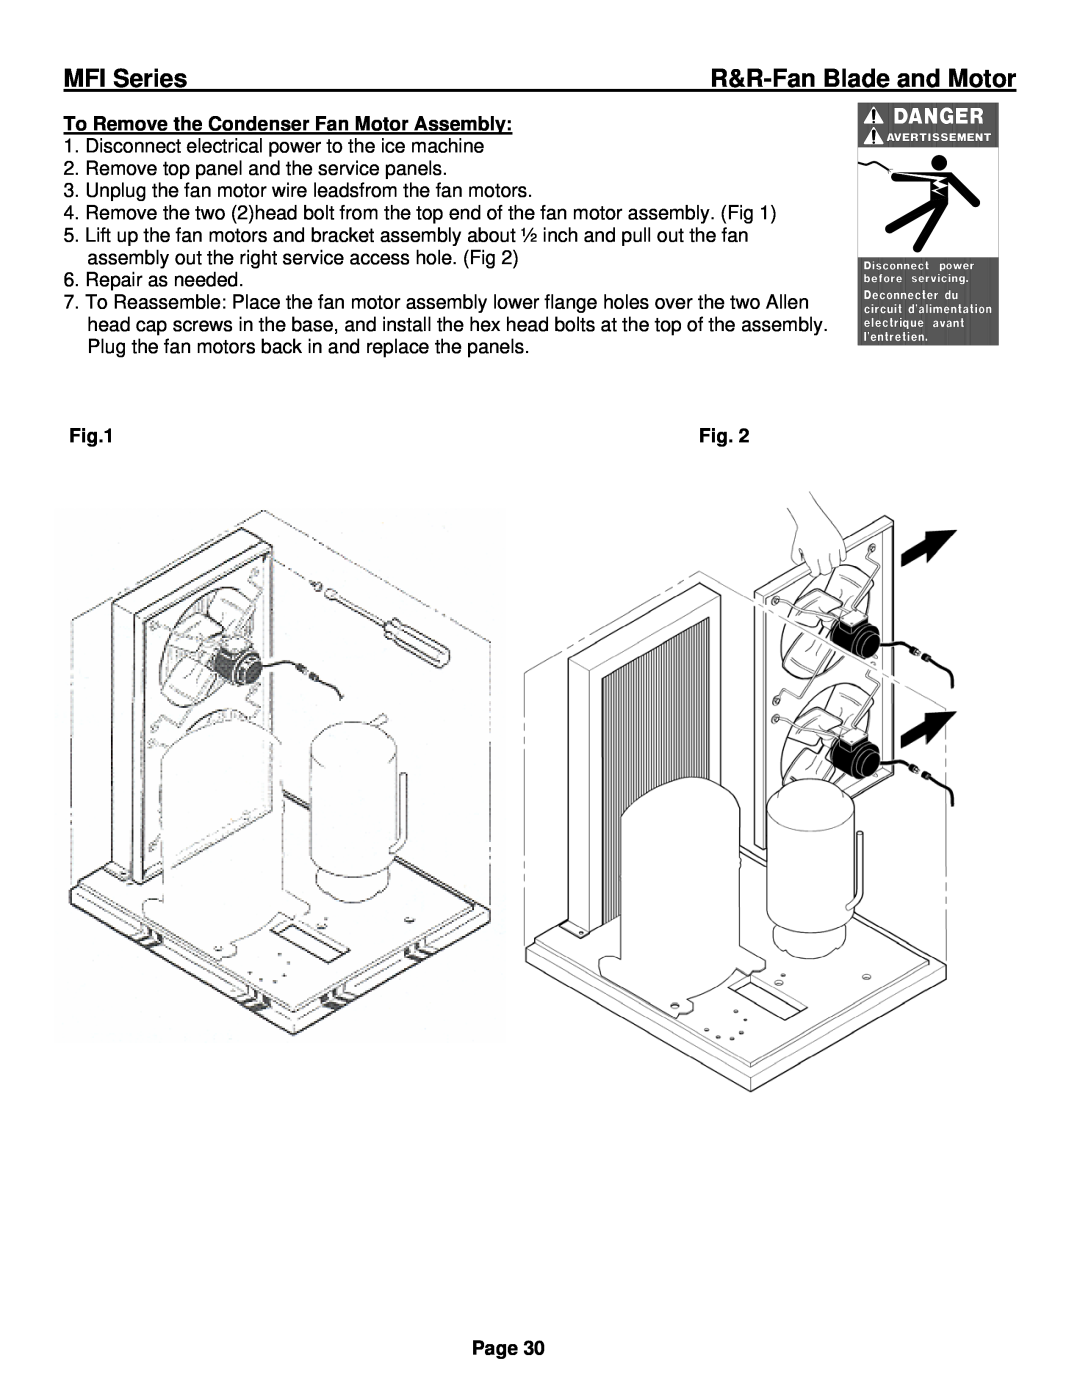 Ice-O-Matic installation manual R&R-FanBlade and Motor, To Remove the Condenser Fan Motor Assembly, MFI Series, Page 